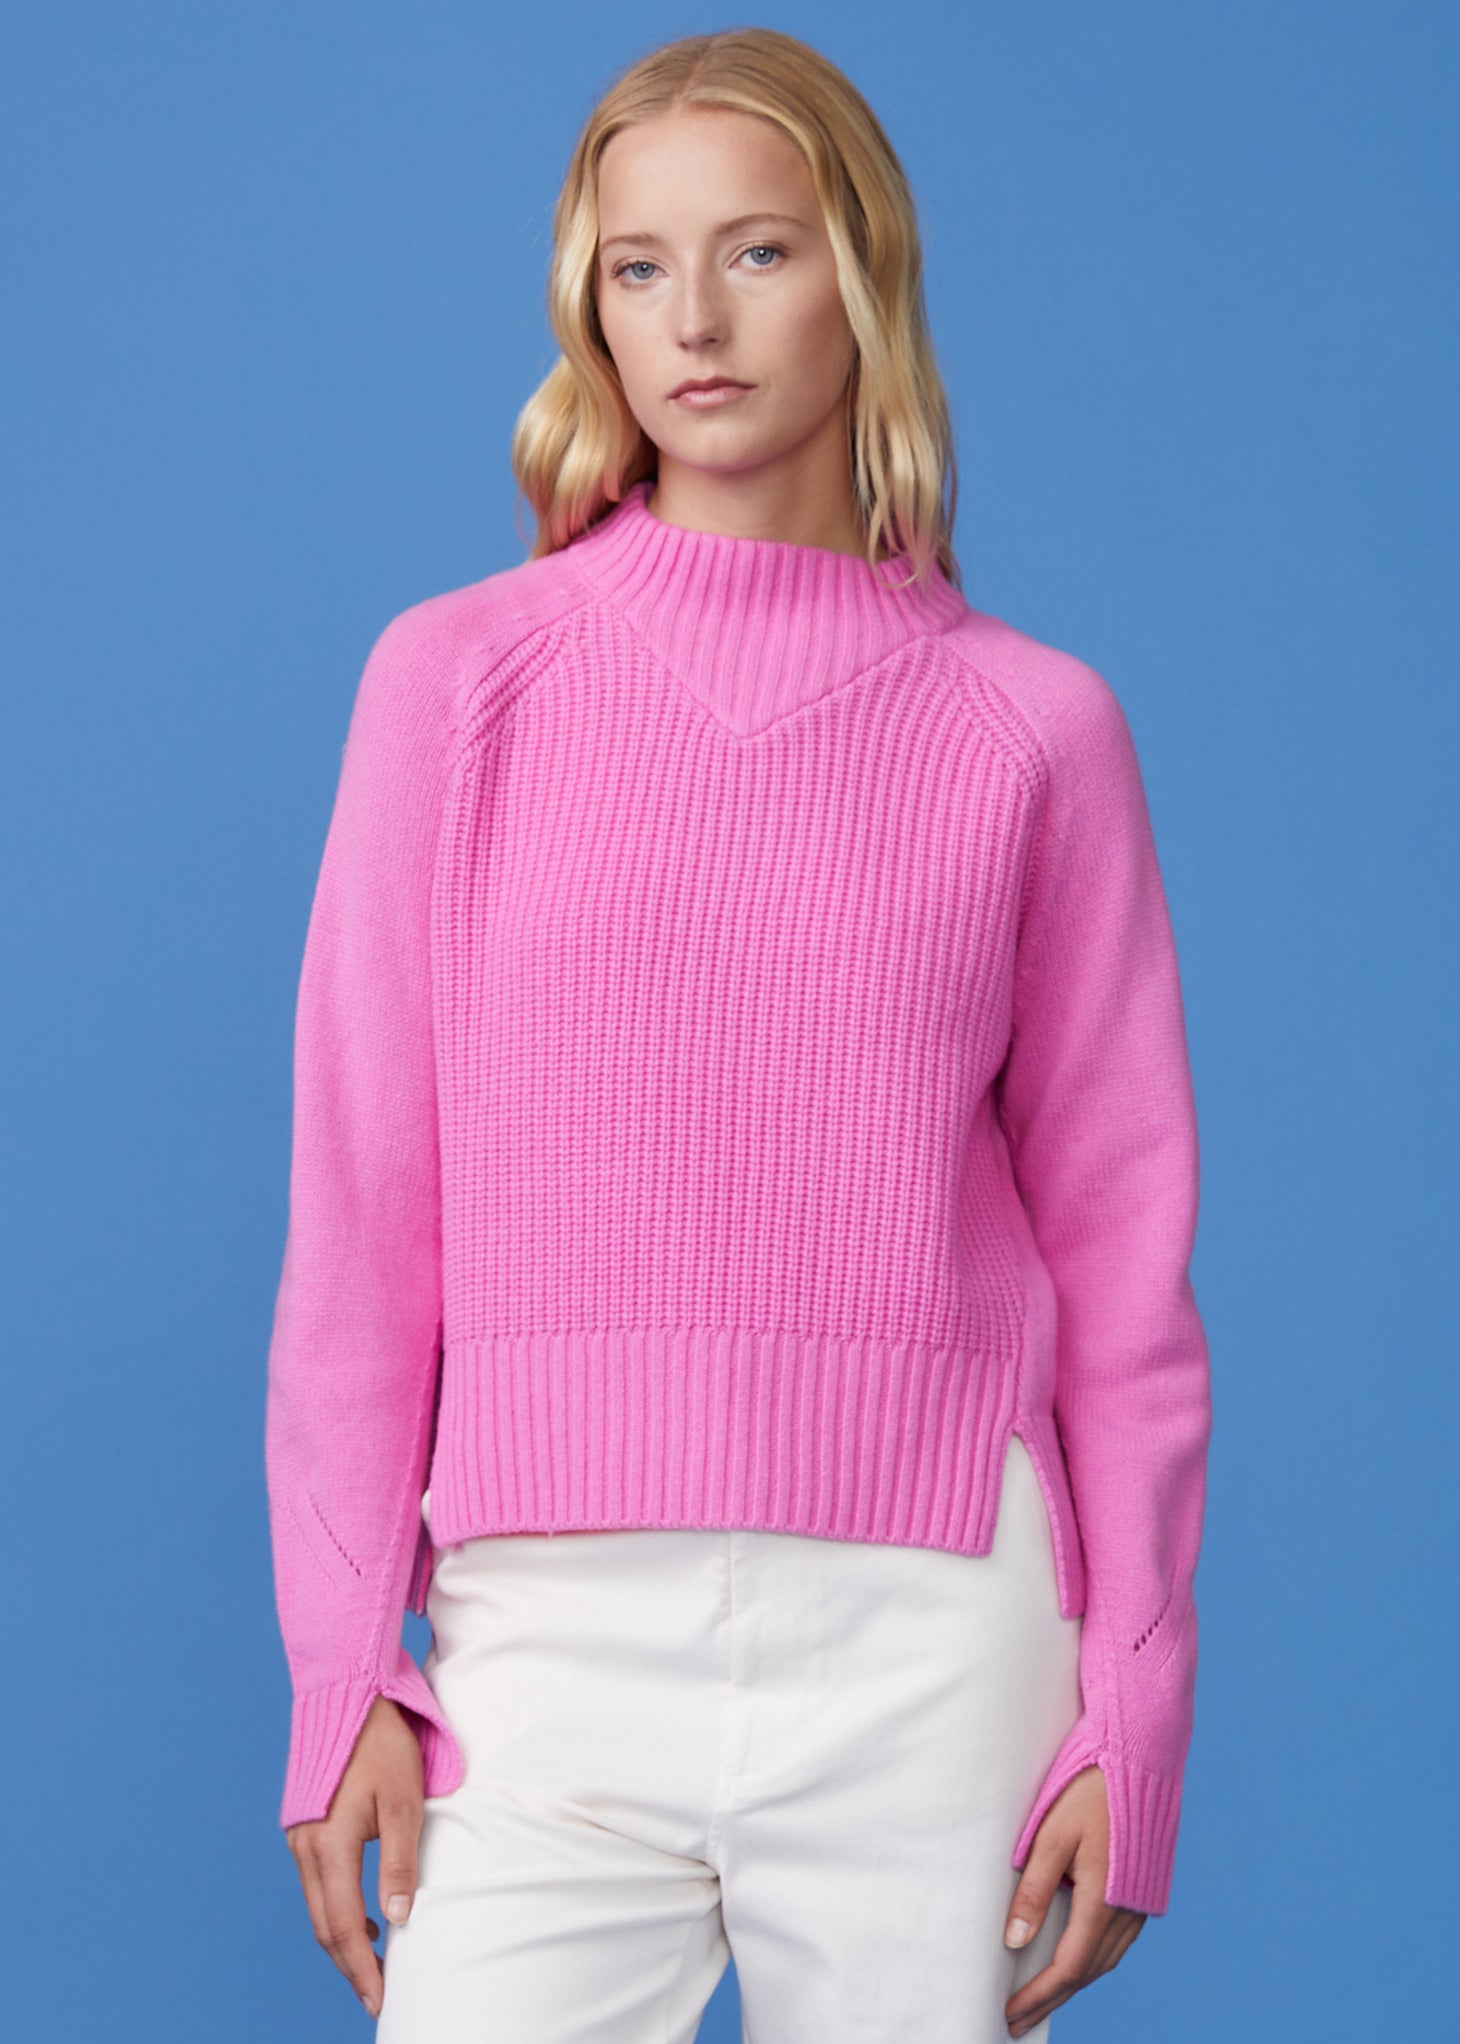 Monrow Wool Cashmere Mock Neck sweater, women's clothing, wool sweater, sweater, mockneck sweater, fashion, dragon fruit pink color